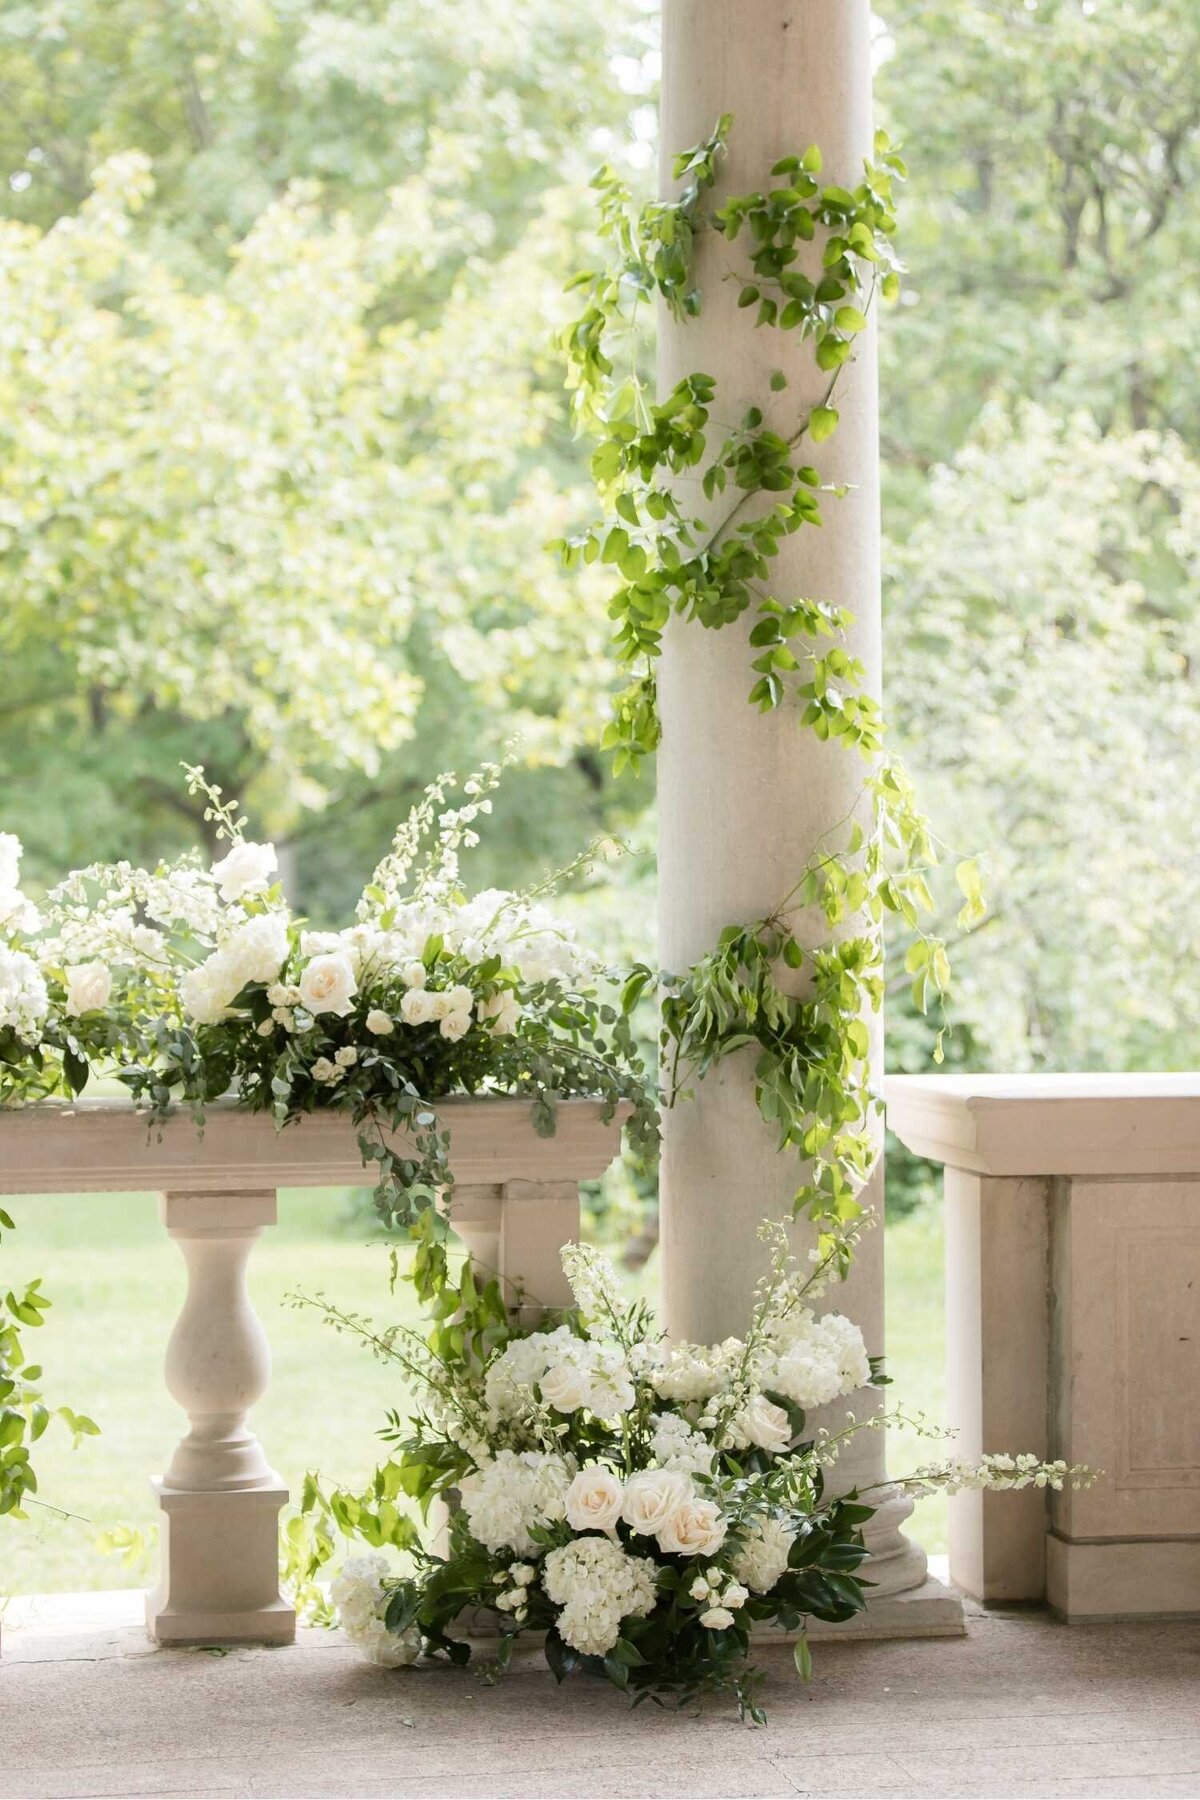 Garden inspired ceremony floral with greenery on the columns  at Columbus Park Refectory for a Luxury Chicago Outdoor Historic Wedding Venue.